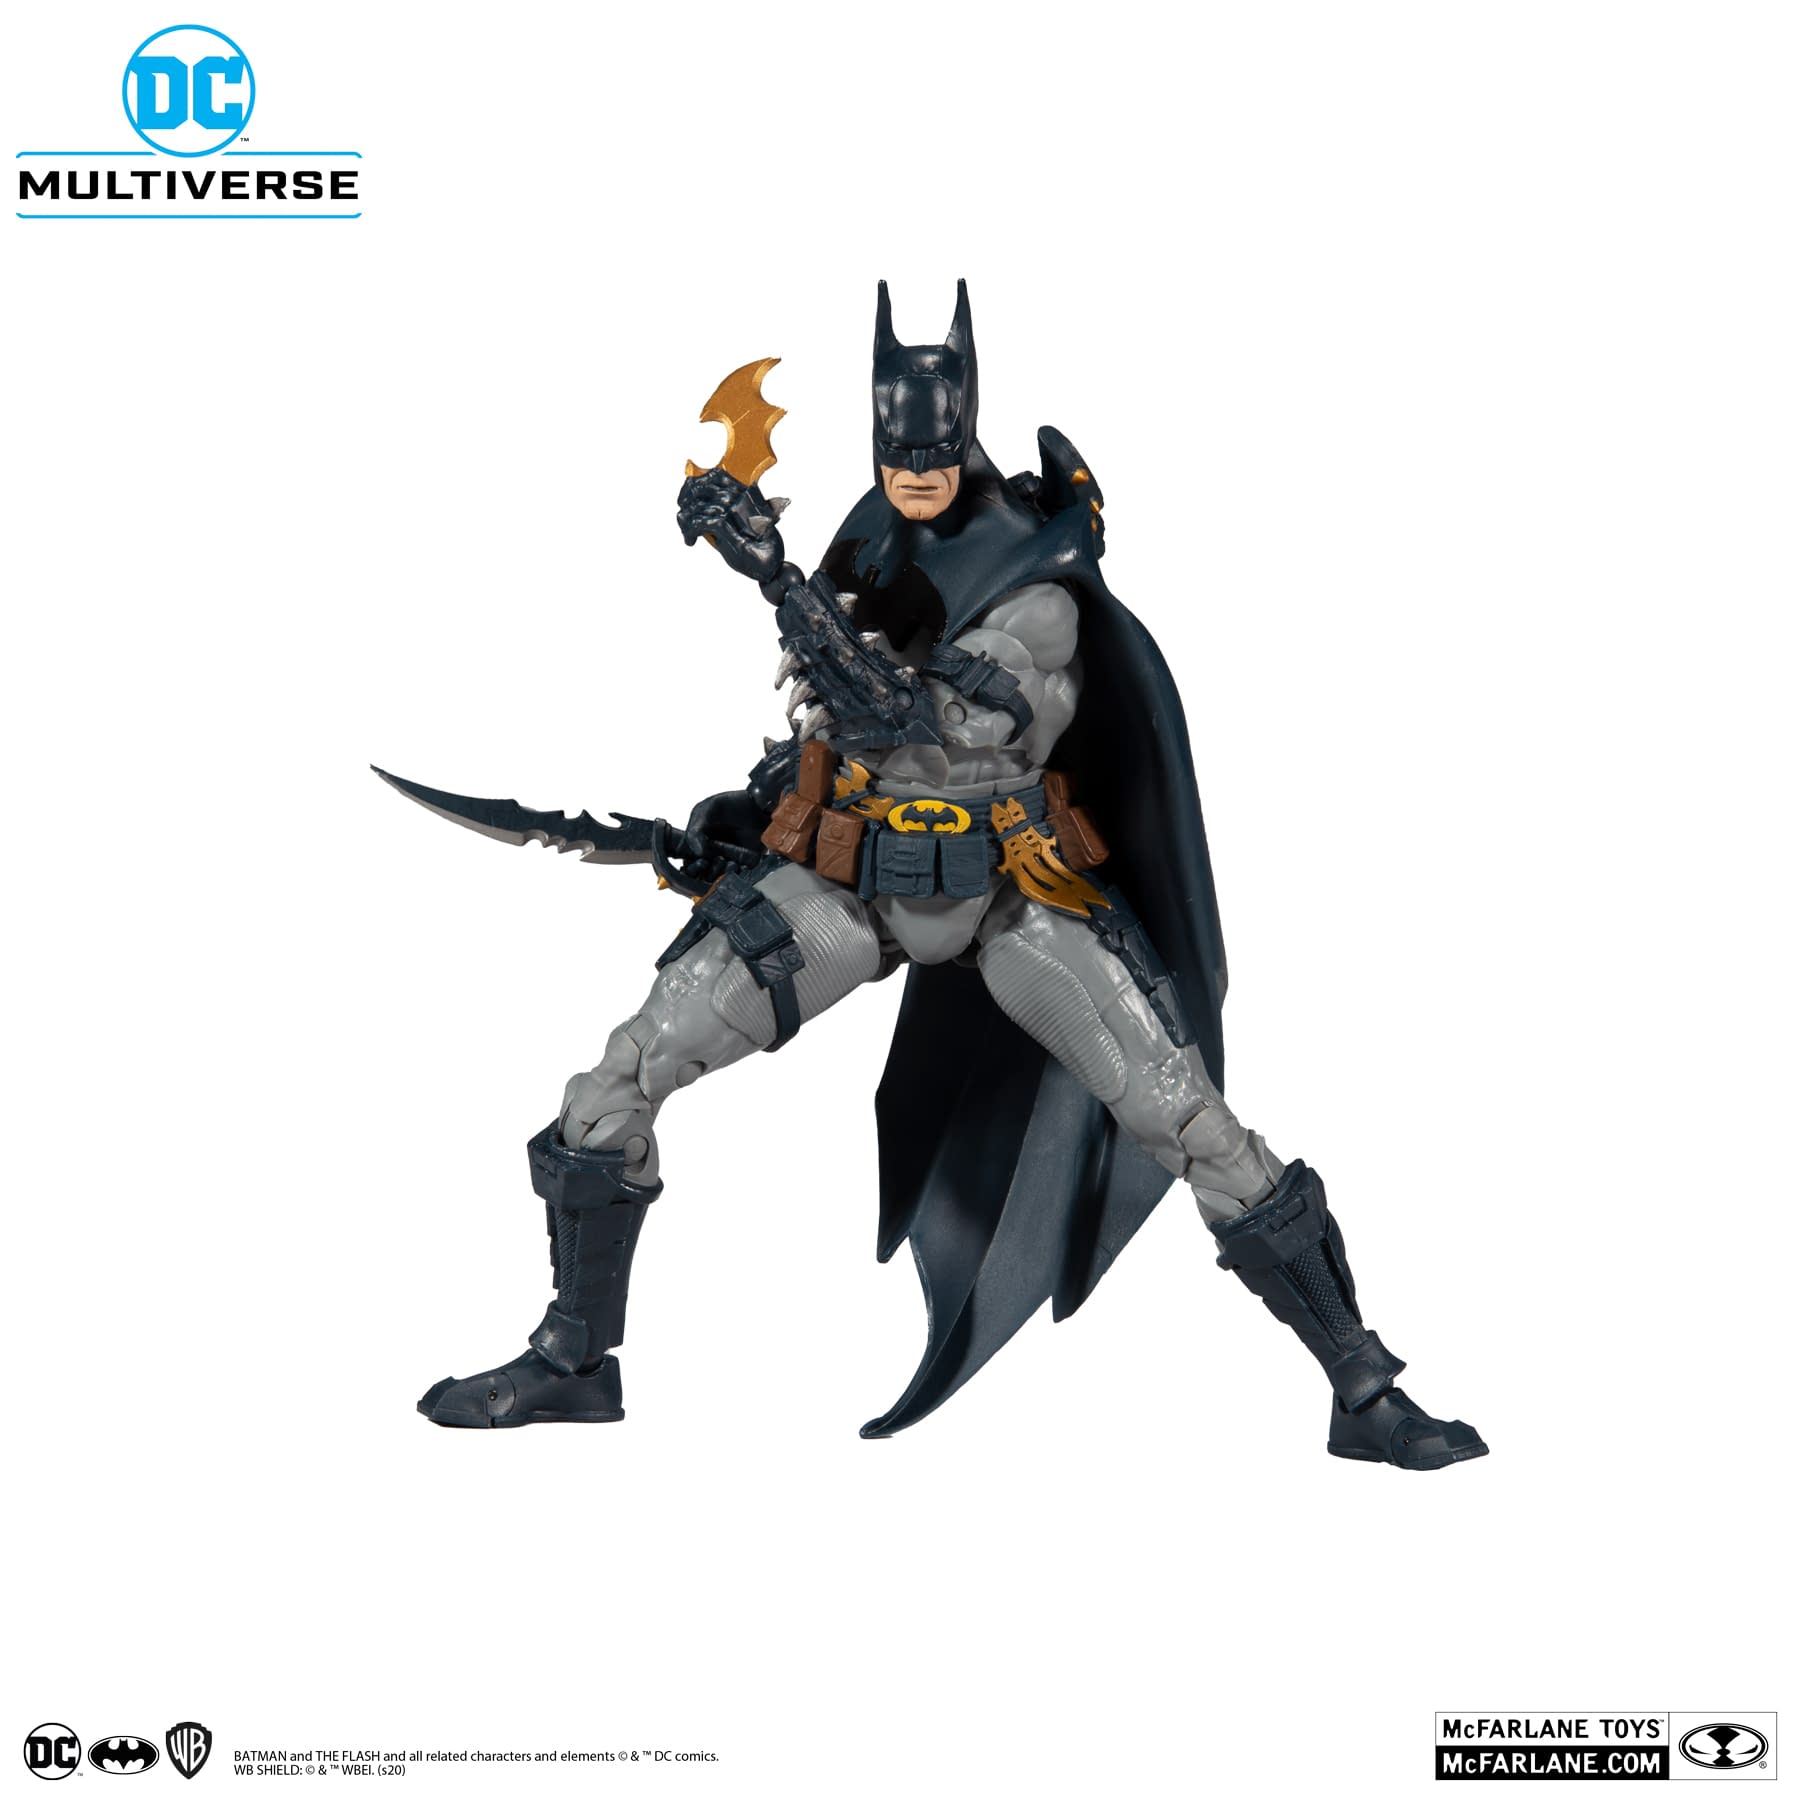 Details about   DC Multiverse 7” Batman Designed By Todd McFarlane New Sealed Toys IN HAND 